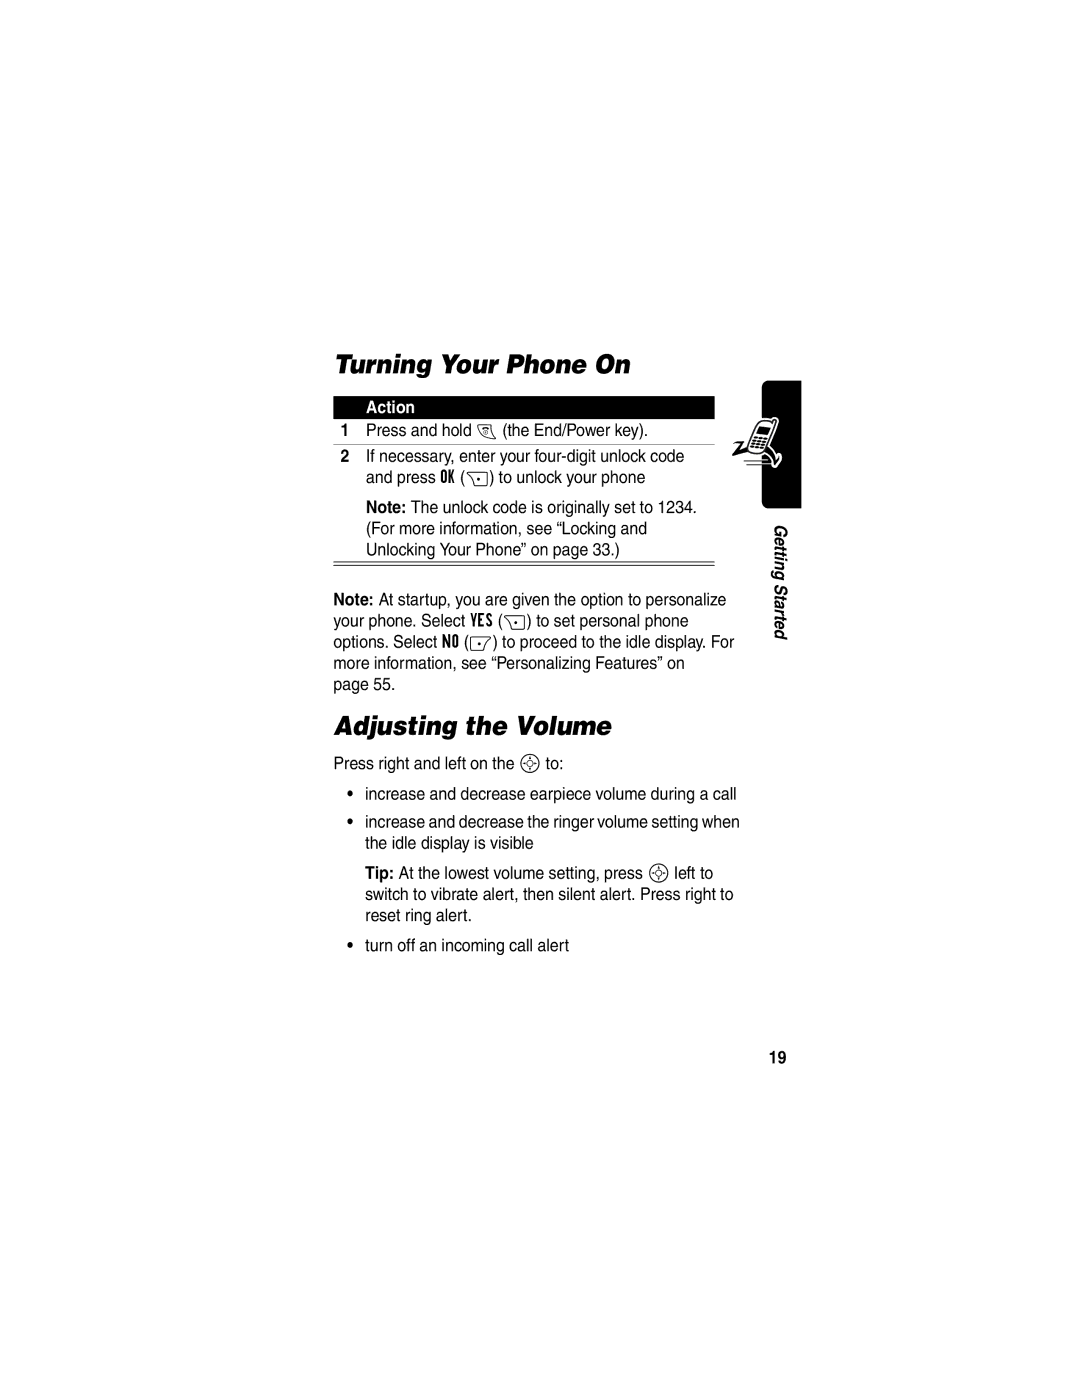 Motorola C353 manual Turning Your Phone On, Adjusting the Volume, Press and hold O the End/Power key 